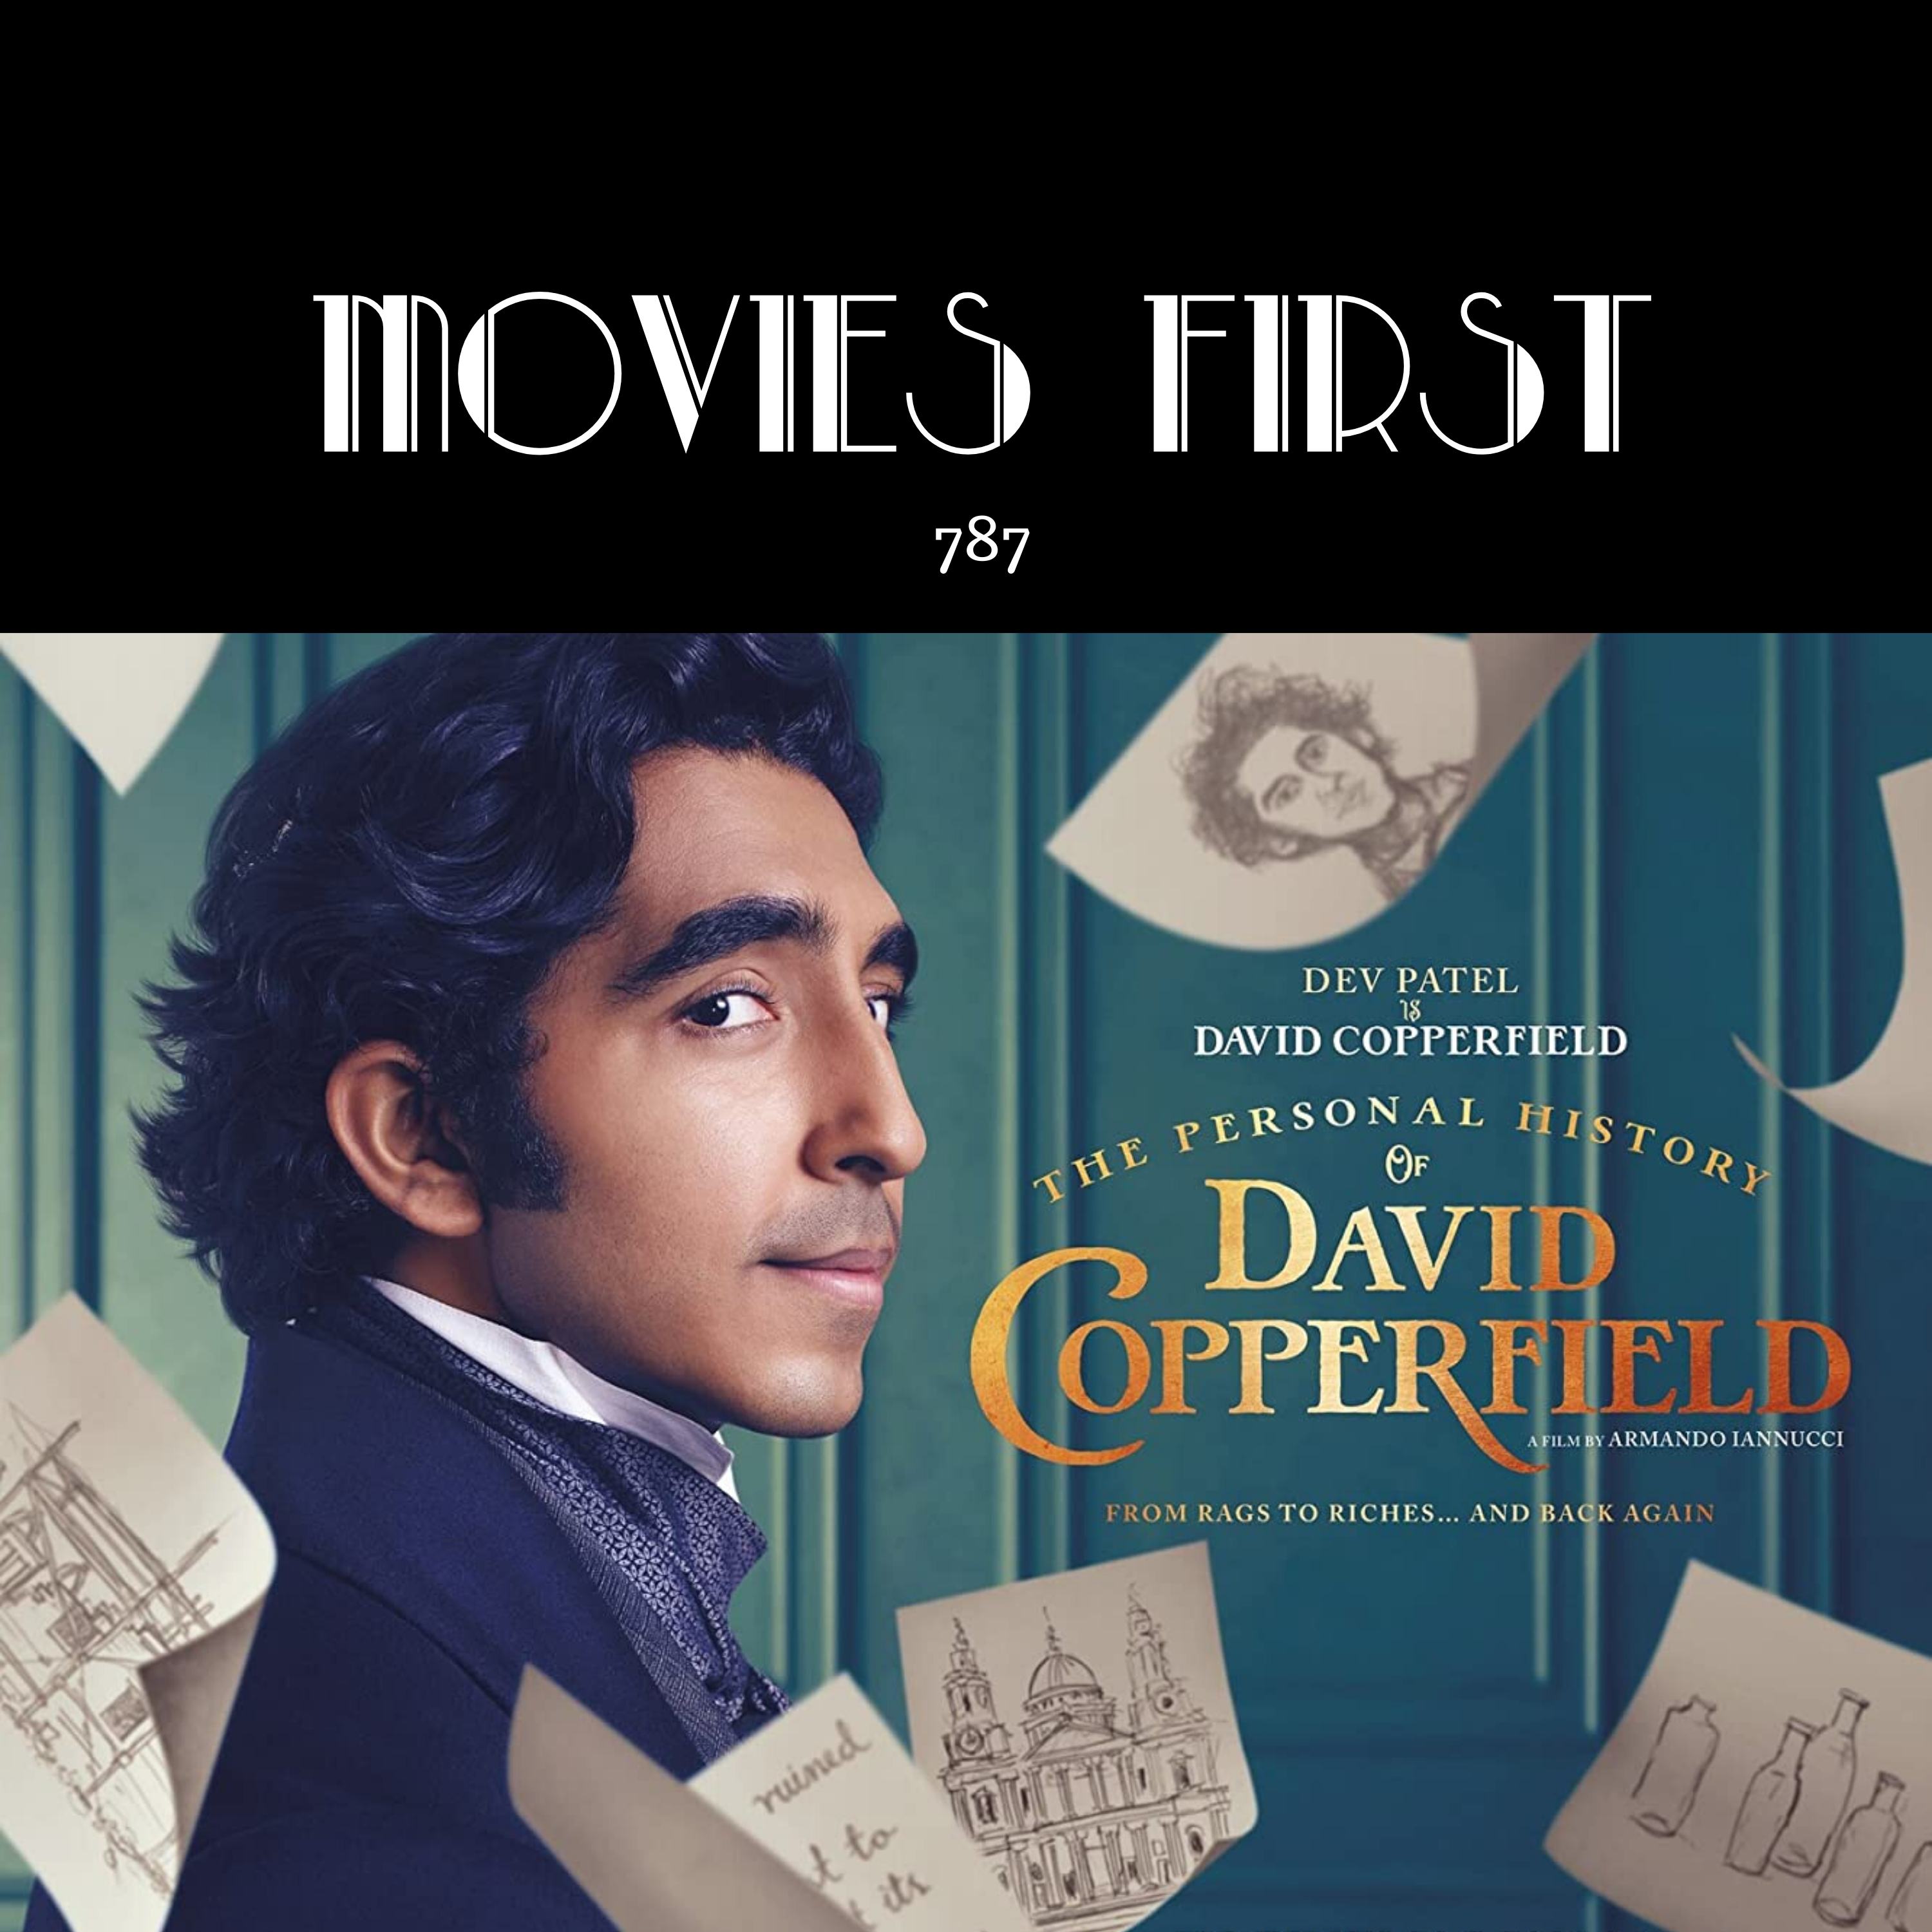 The Personal History of David Copperfield (Comedy, Drama) (the @MoviesFirst Review